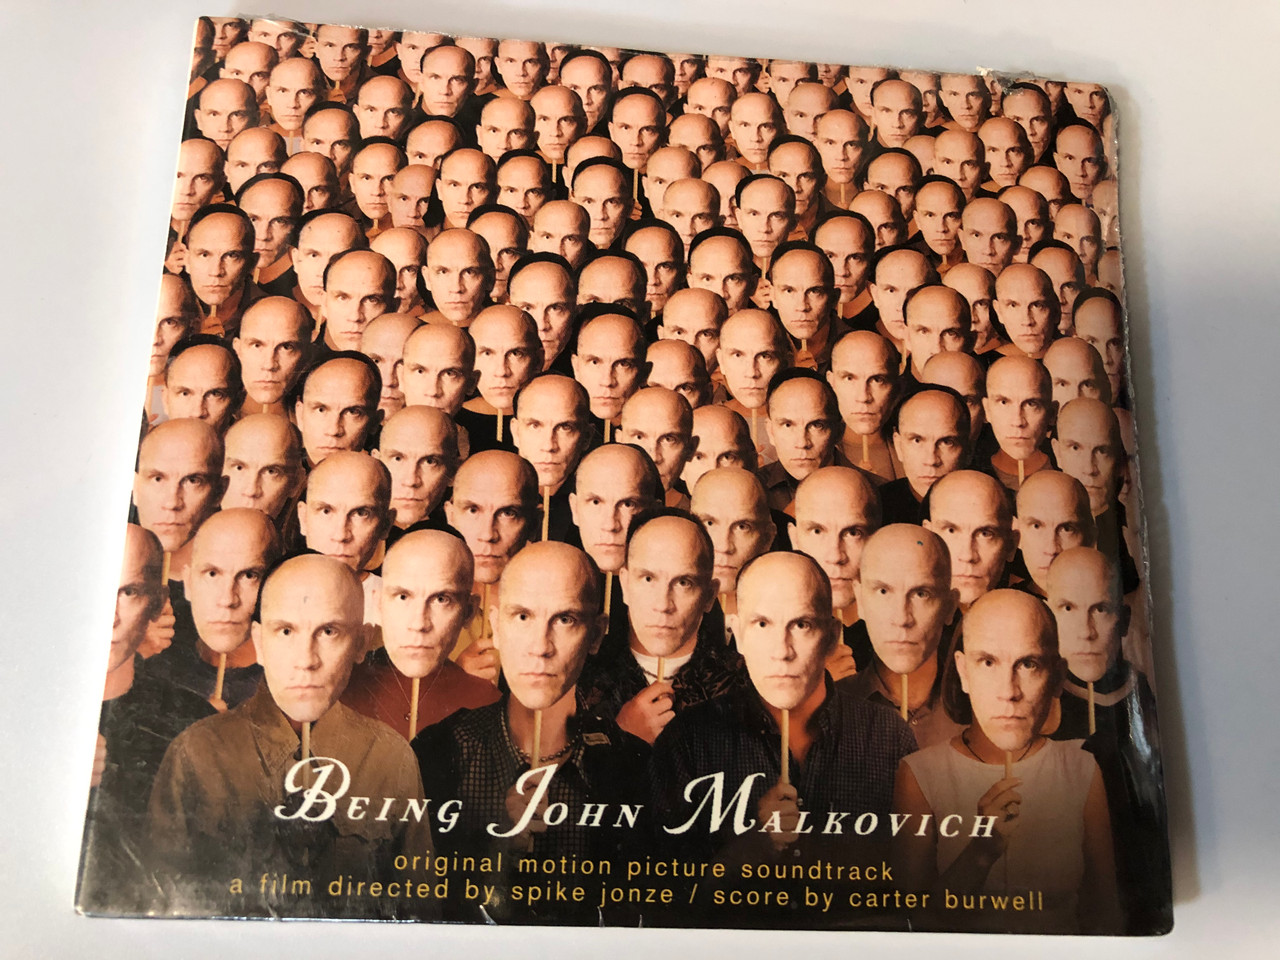 https://cdn10.bigcommerce.com/s-62bdpkt7pb/products/28111/images/168348/Being_John_Malkovich_Original_Motion_Picture_Soundtrack_A_film_directed_by_Spike_Jonze_Score_by_Carter_Burwell_Source_Audio_CD_1999_724384876401_1__81916.1613475530.1280.1280.JPG?c=2&_ga=2.174093862.543434869.1618406858-6505287.1618406858